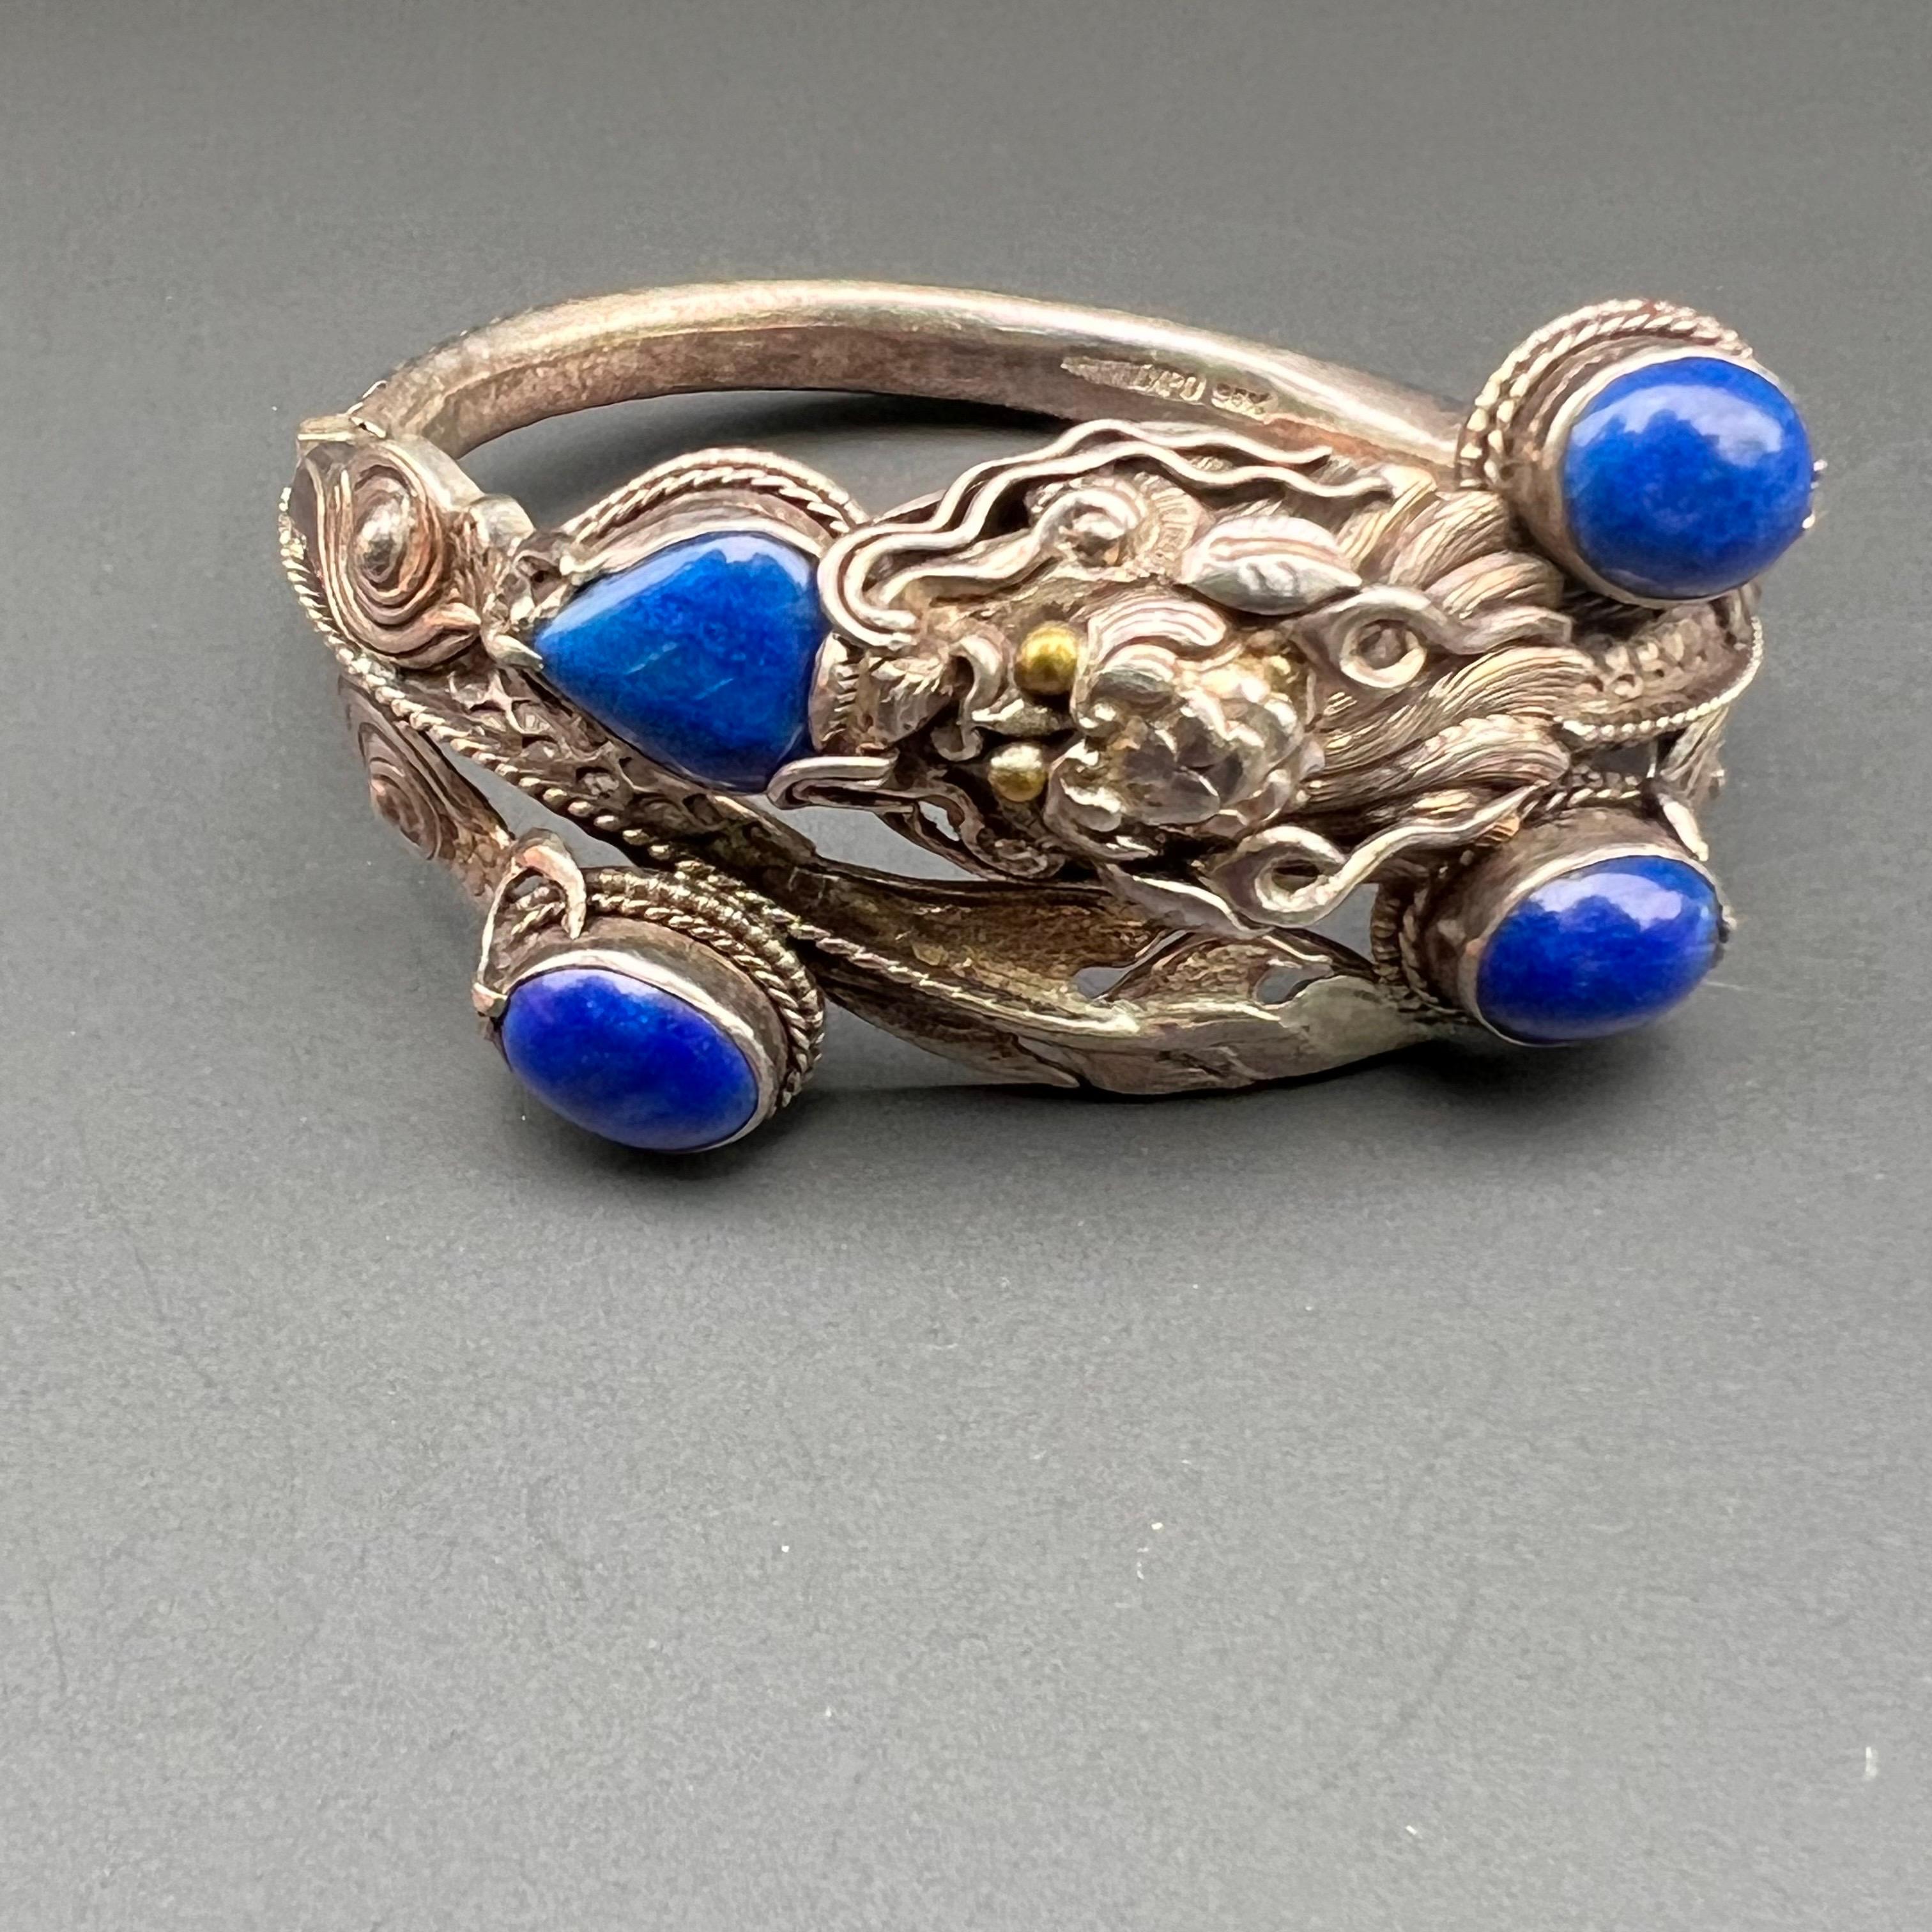 Embrace the magic of the East with our Charming Chinese Dragon Hinged Bangle, a symbol of strength and good luck. Adorned with a detailed Chinese dragon motif, dragons are revered in Chinese culture for their wisdom and prosperity, making this